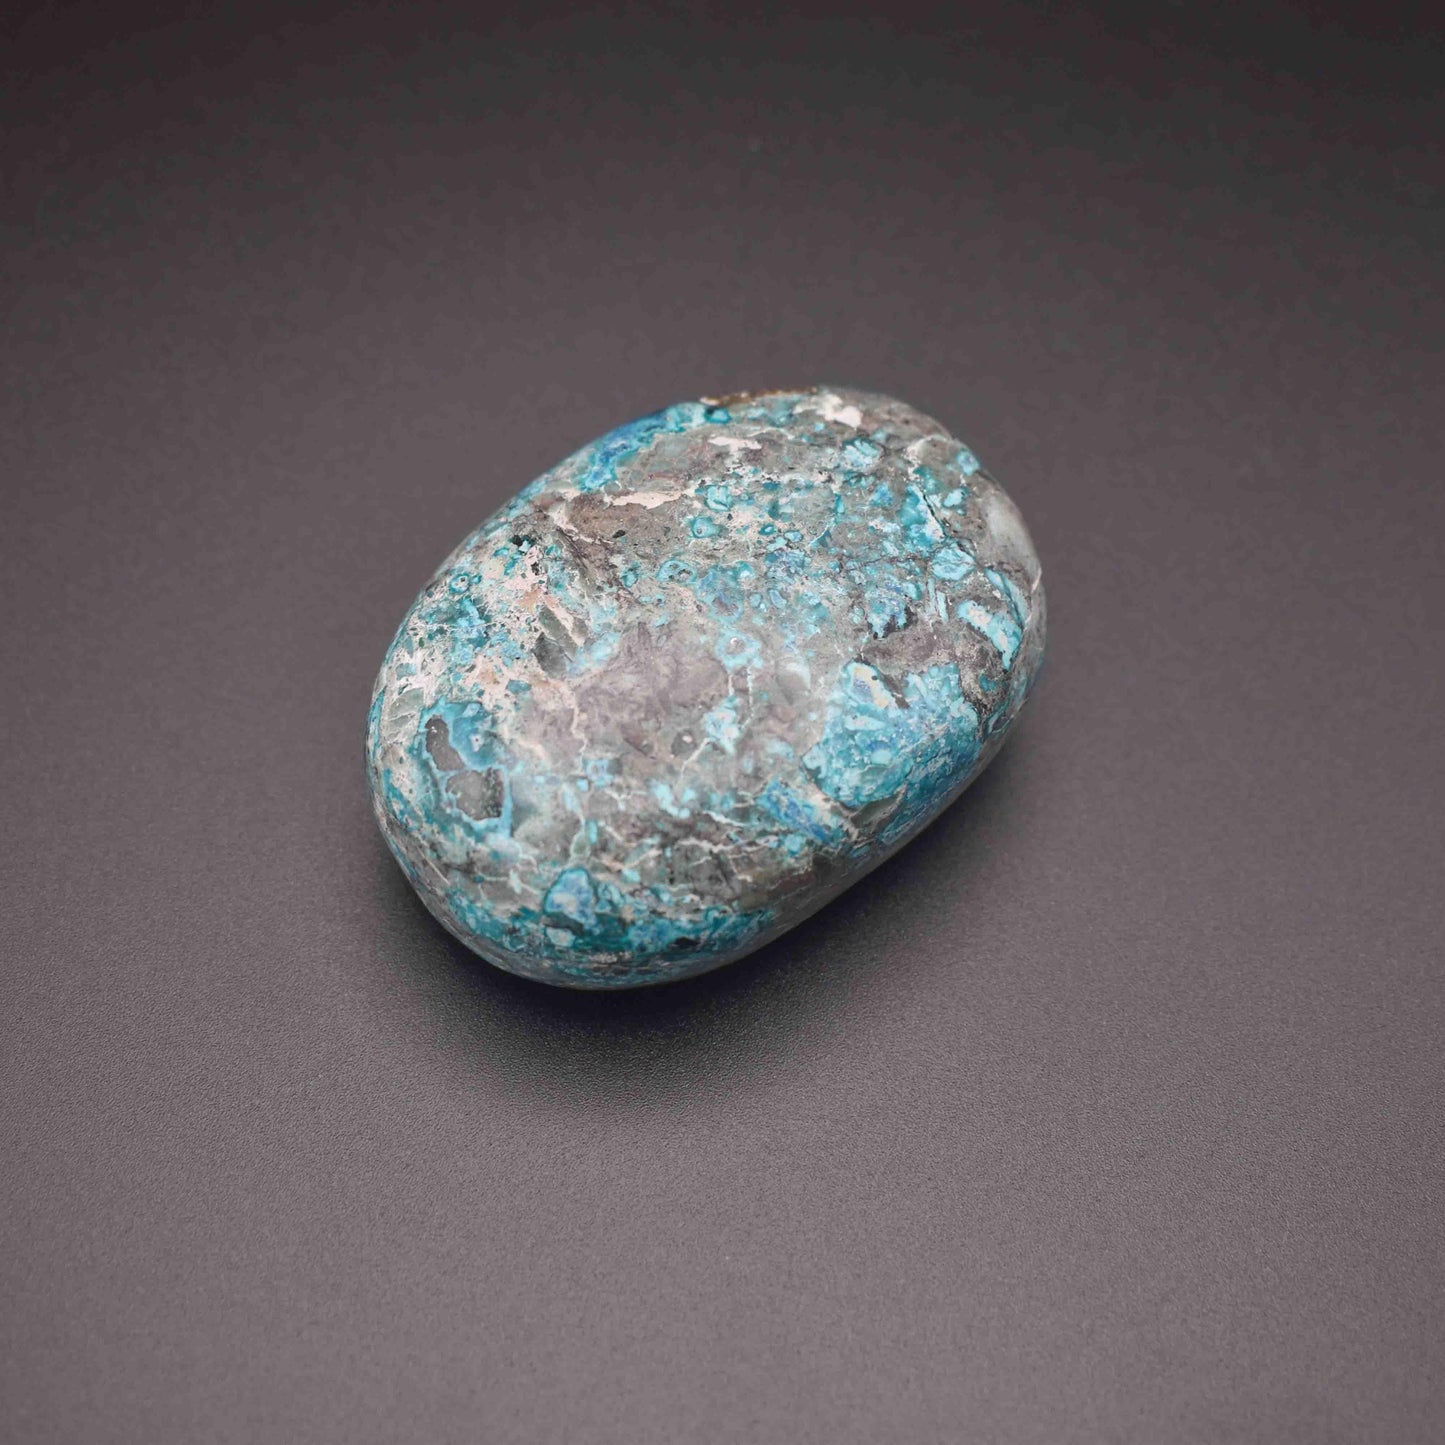 African Turquoise Palm Stone - Mystic Gleam